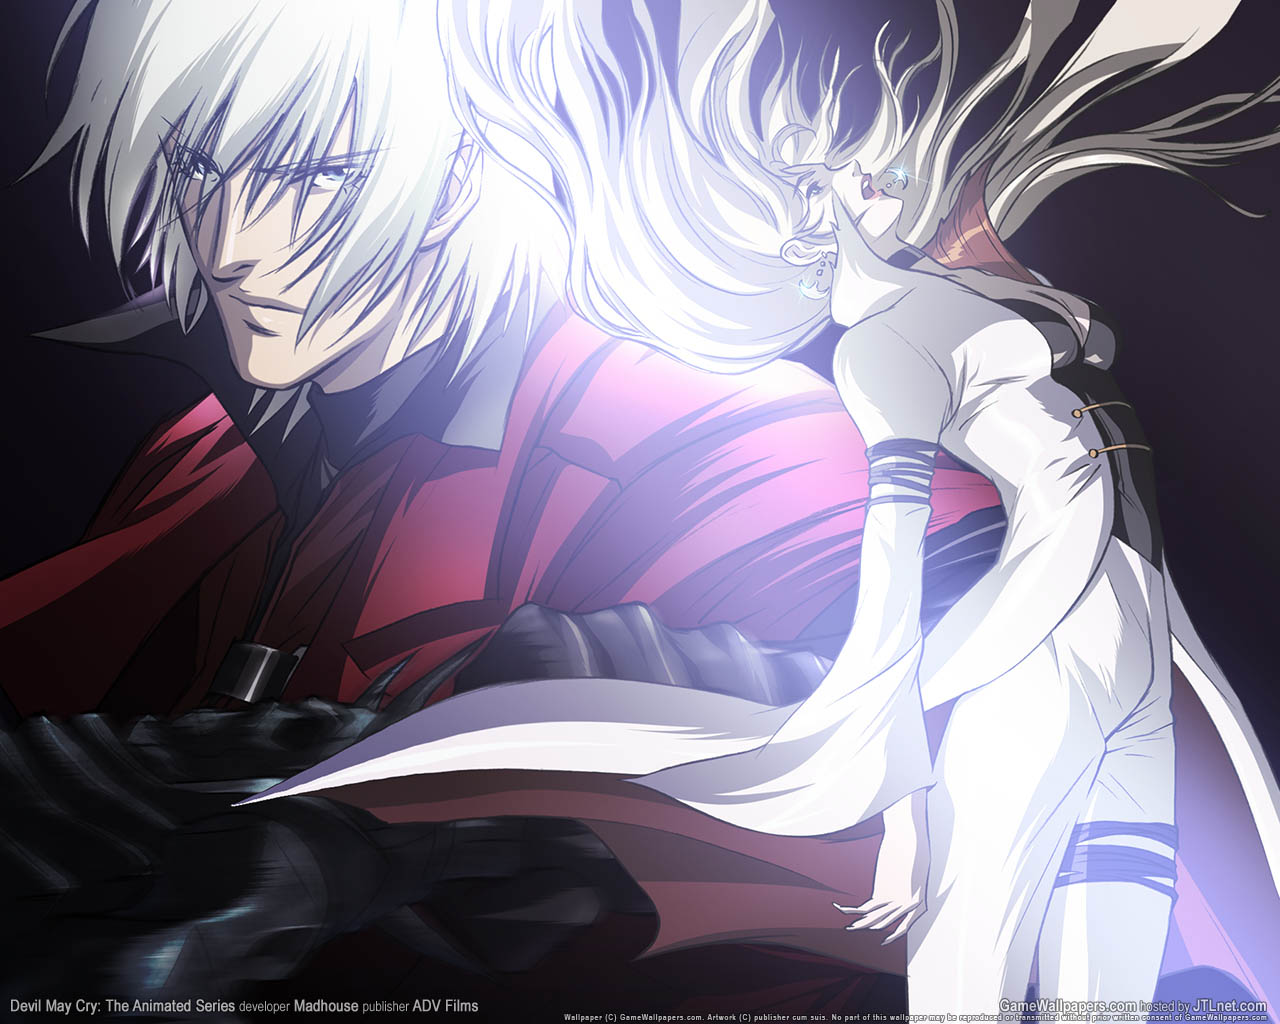 Devil May Cry: The Animated Series fond d'cran 02 1280x1024